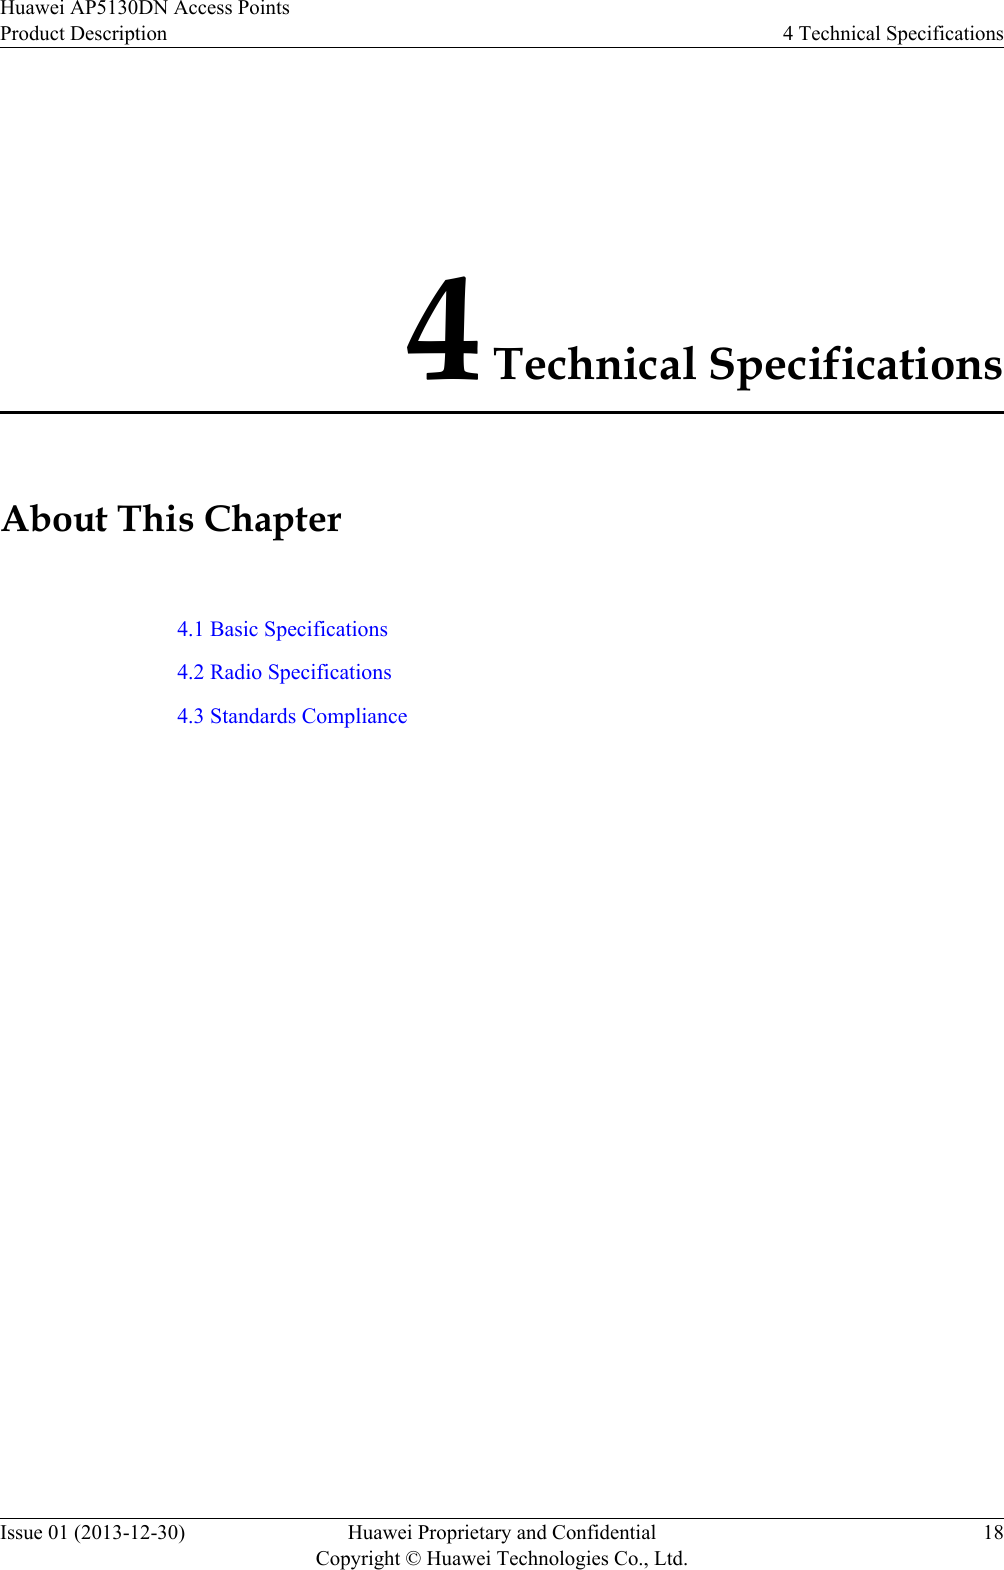 4 Technical SpecificationsAbout This Chapter4.1 Basic Specifications4.2 Radio Specifications4.3 Standards ComplianceHuawei AP5130DN Access PointsProduct Description 4 Technical SpecificationsIssue 01 (2013-12-30) Huawei Proprietary and ConfidentialCopyright © Huawei Technologies Co., Ltd.18